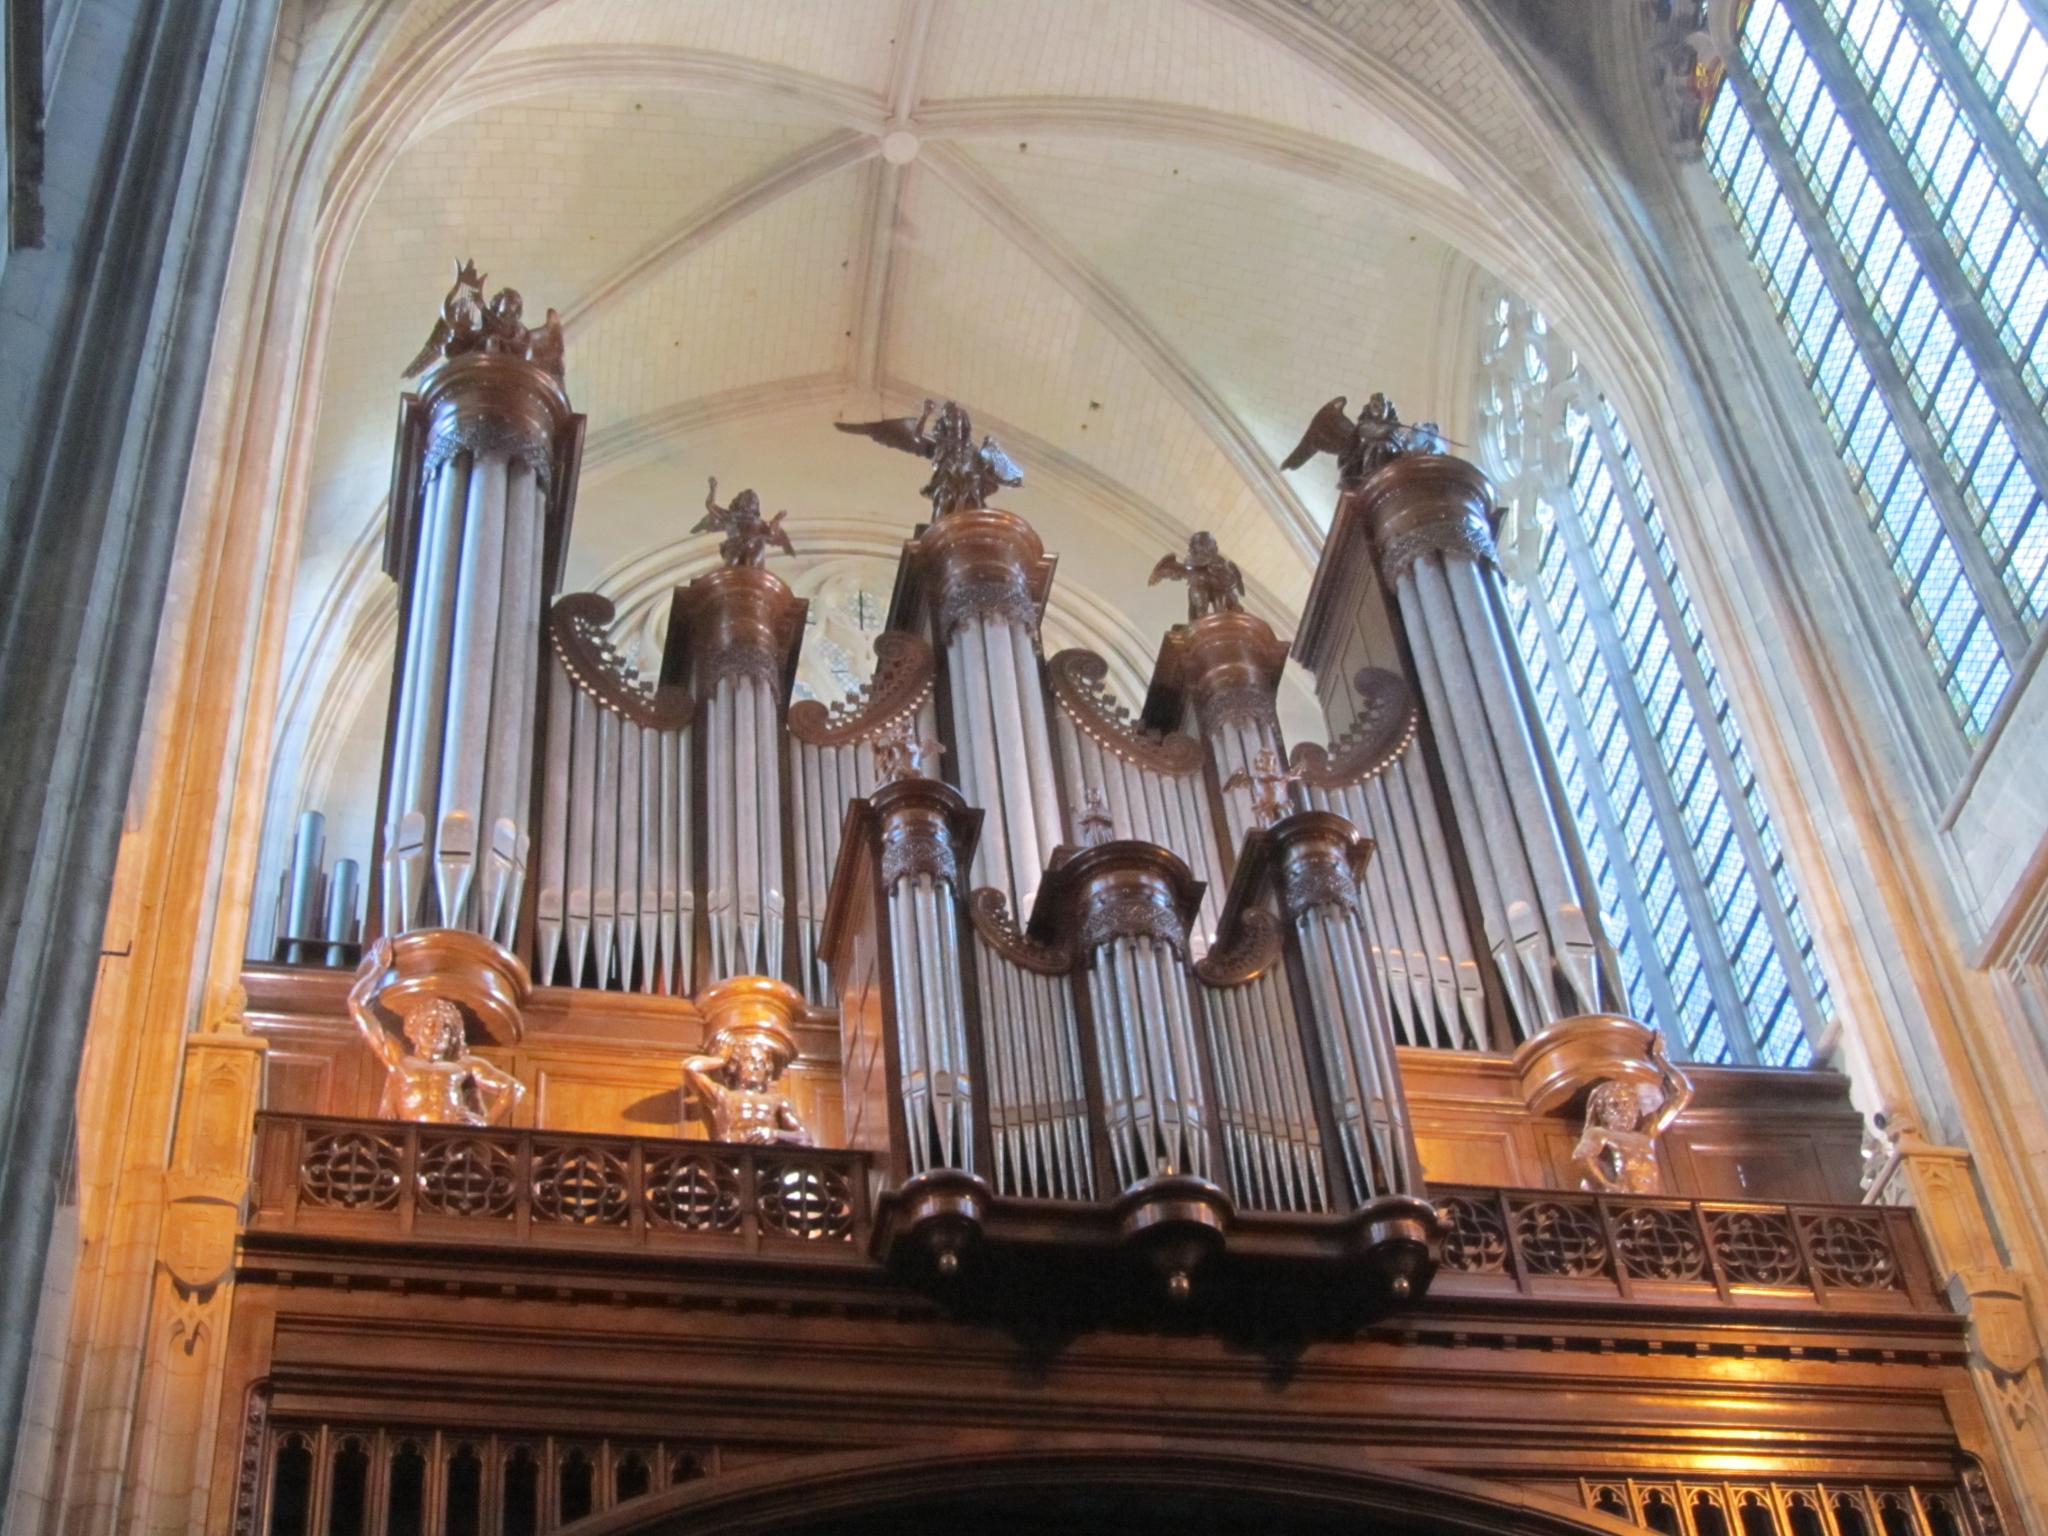 a pipe organ is shown in the ceiling